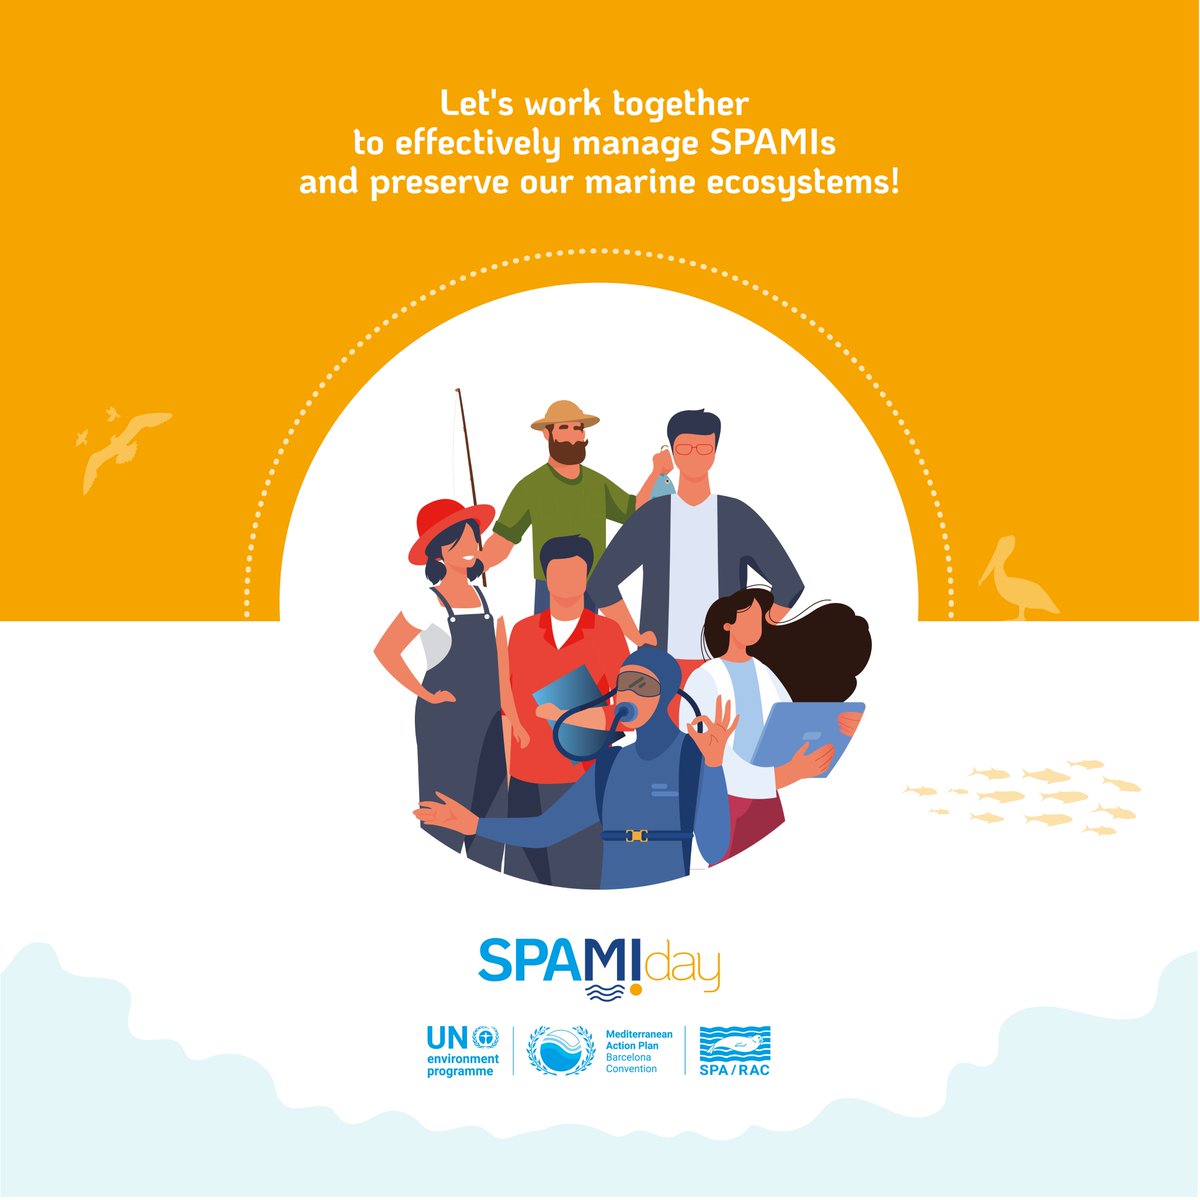 Today marks the start of the celebration of Specially Protected Areas of Mediterranean Importance! Over the next four weeks, we'll be discussing effective #SPAMI management and marine conservation. Stay tuned! #SPAMIday2024 #Act4Med